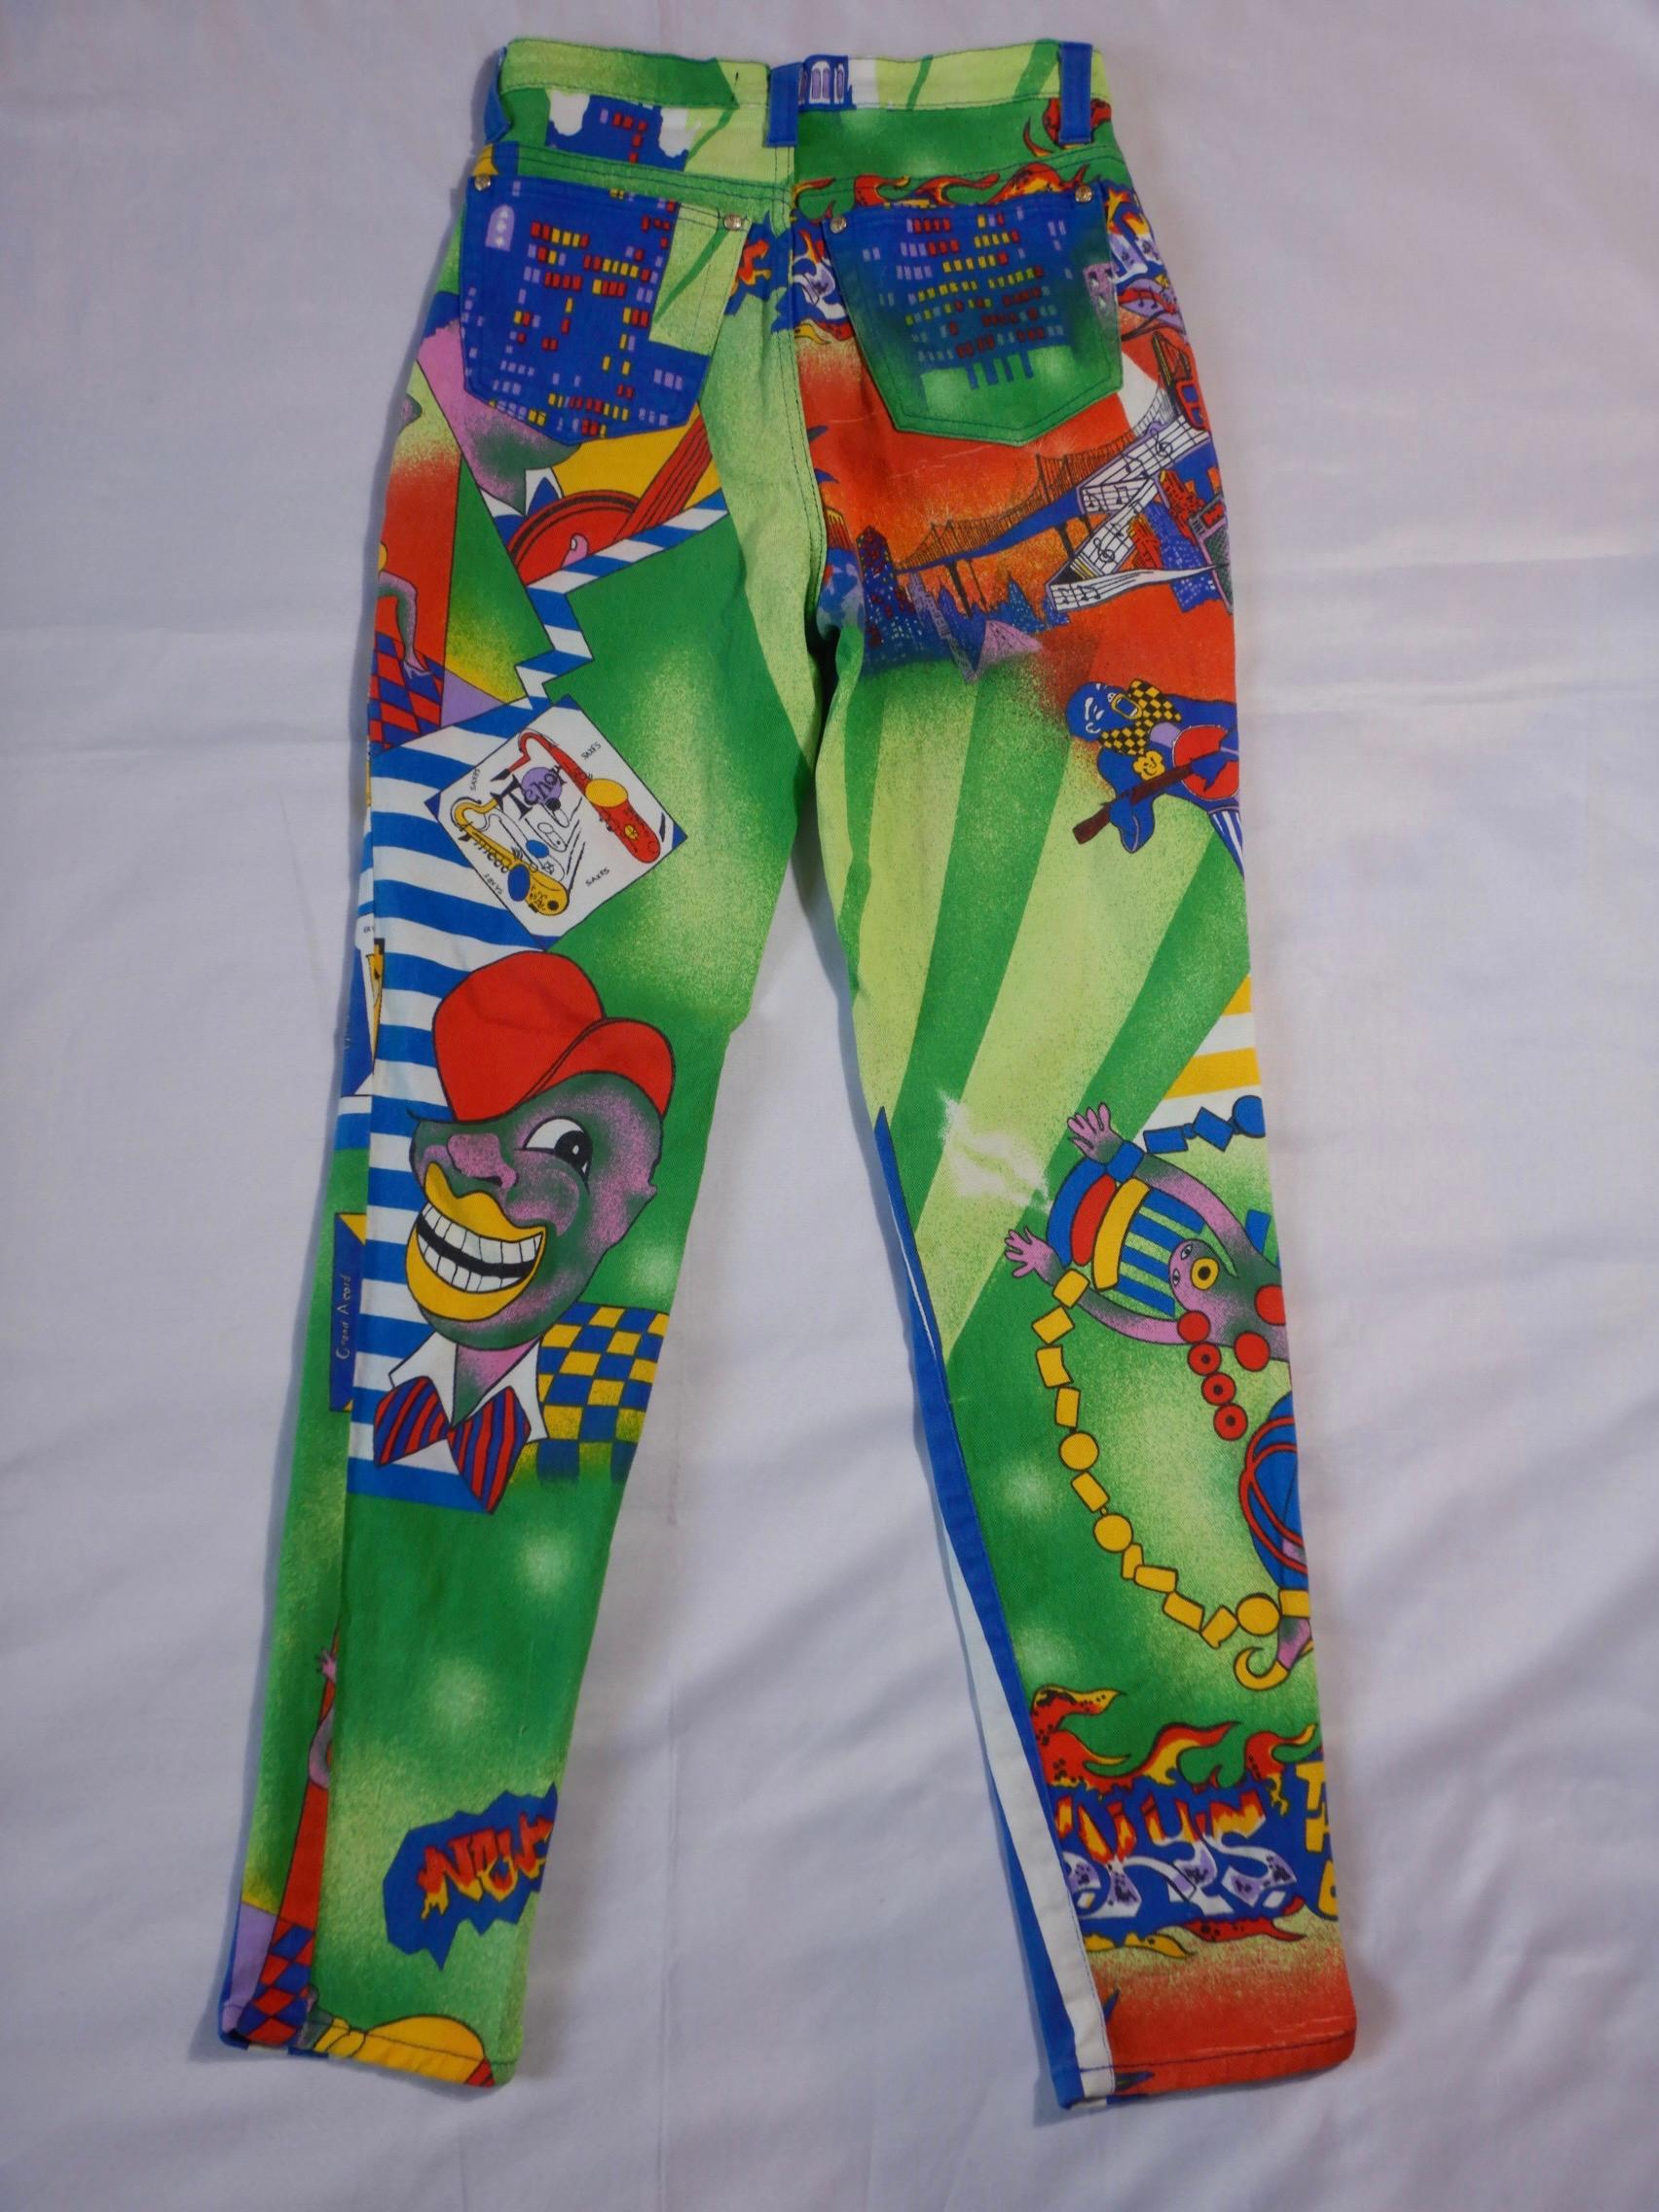 Whimsical vibrant vintage Versace Jeans Couture stretch jeans.

Jeans feature all over print with New York Jazz Age motif. 

High rise with skinny leg.

Very stretchy form fitting jeans.

Fabric is cotton with 2% elasten.

Tagged size 31 45.

The